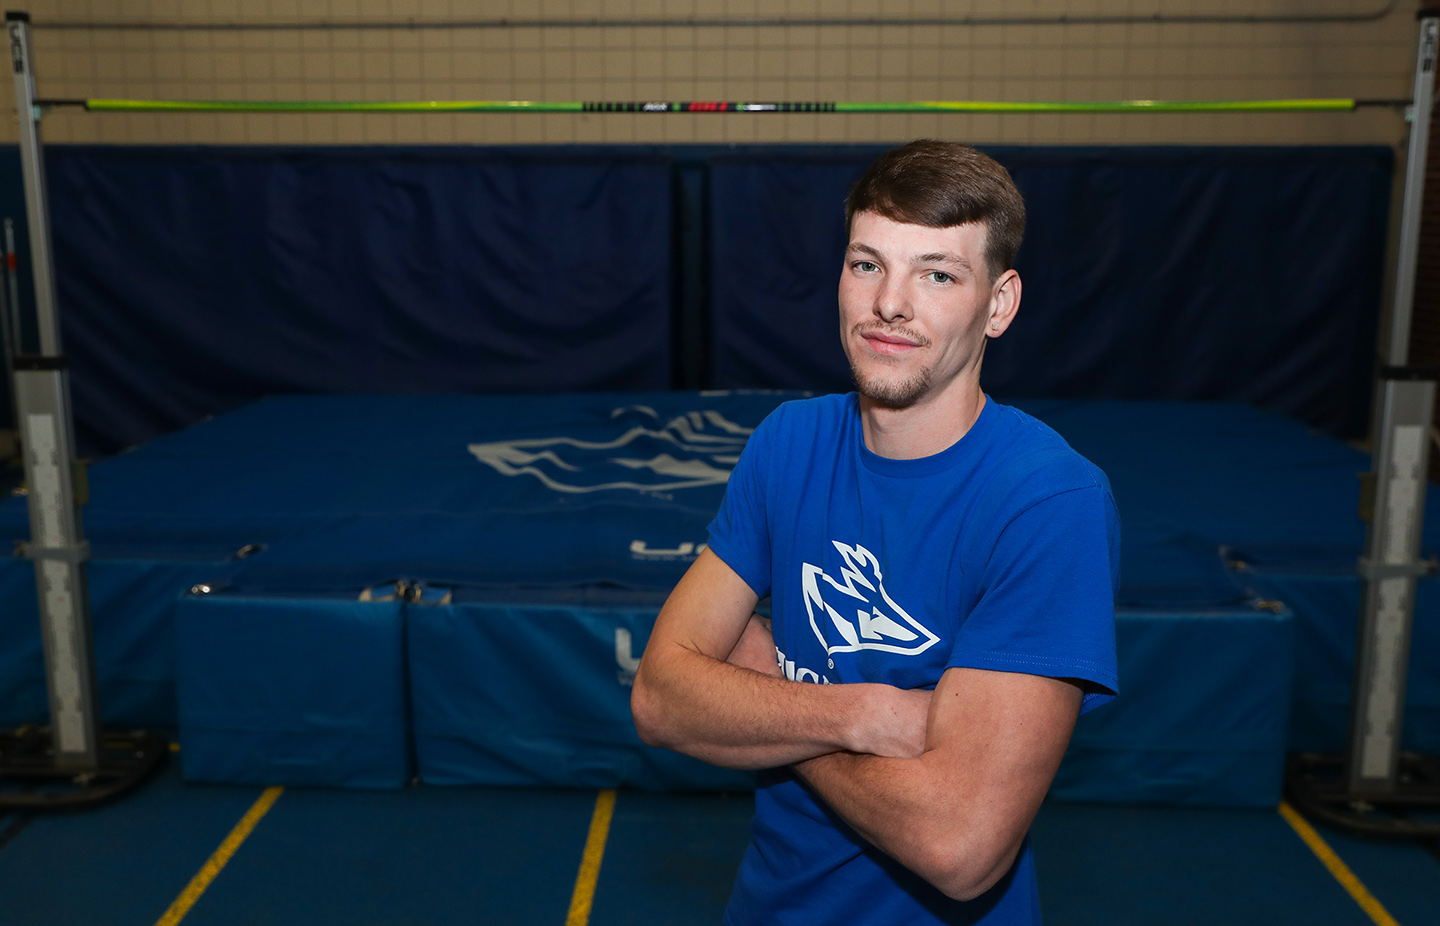 Brayden Sorensen holds the indoor and outdoor high jump records at UNK. The three-time All-American is competing in his fifth NCAA Division II Championship this weekend. (Photo by Erika Pritchard, UNK Communications)